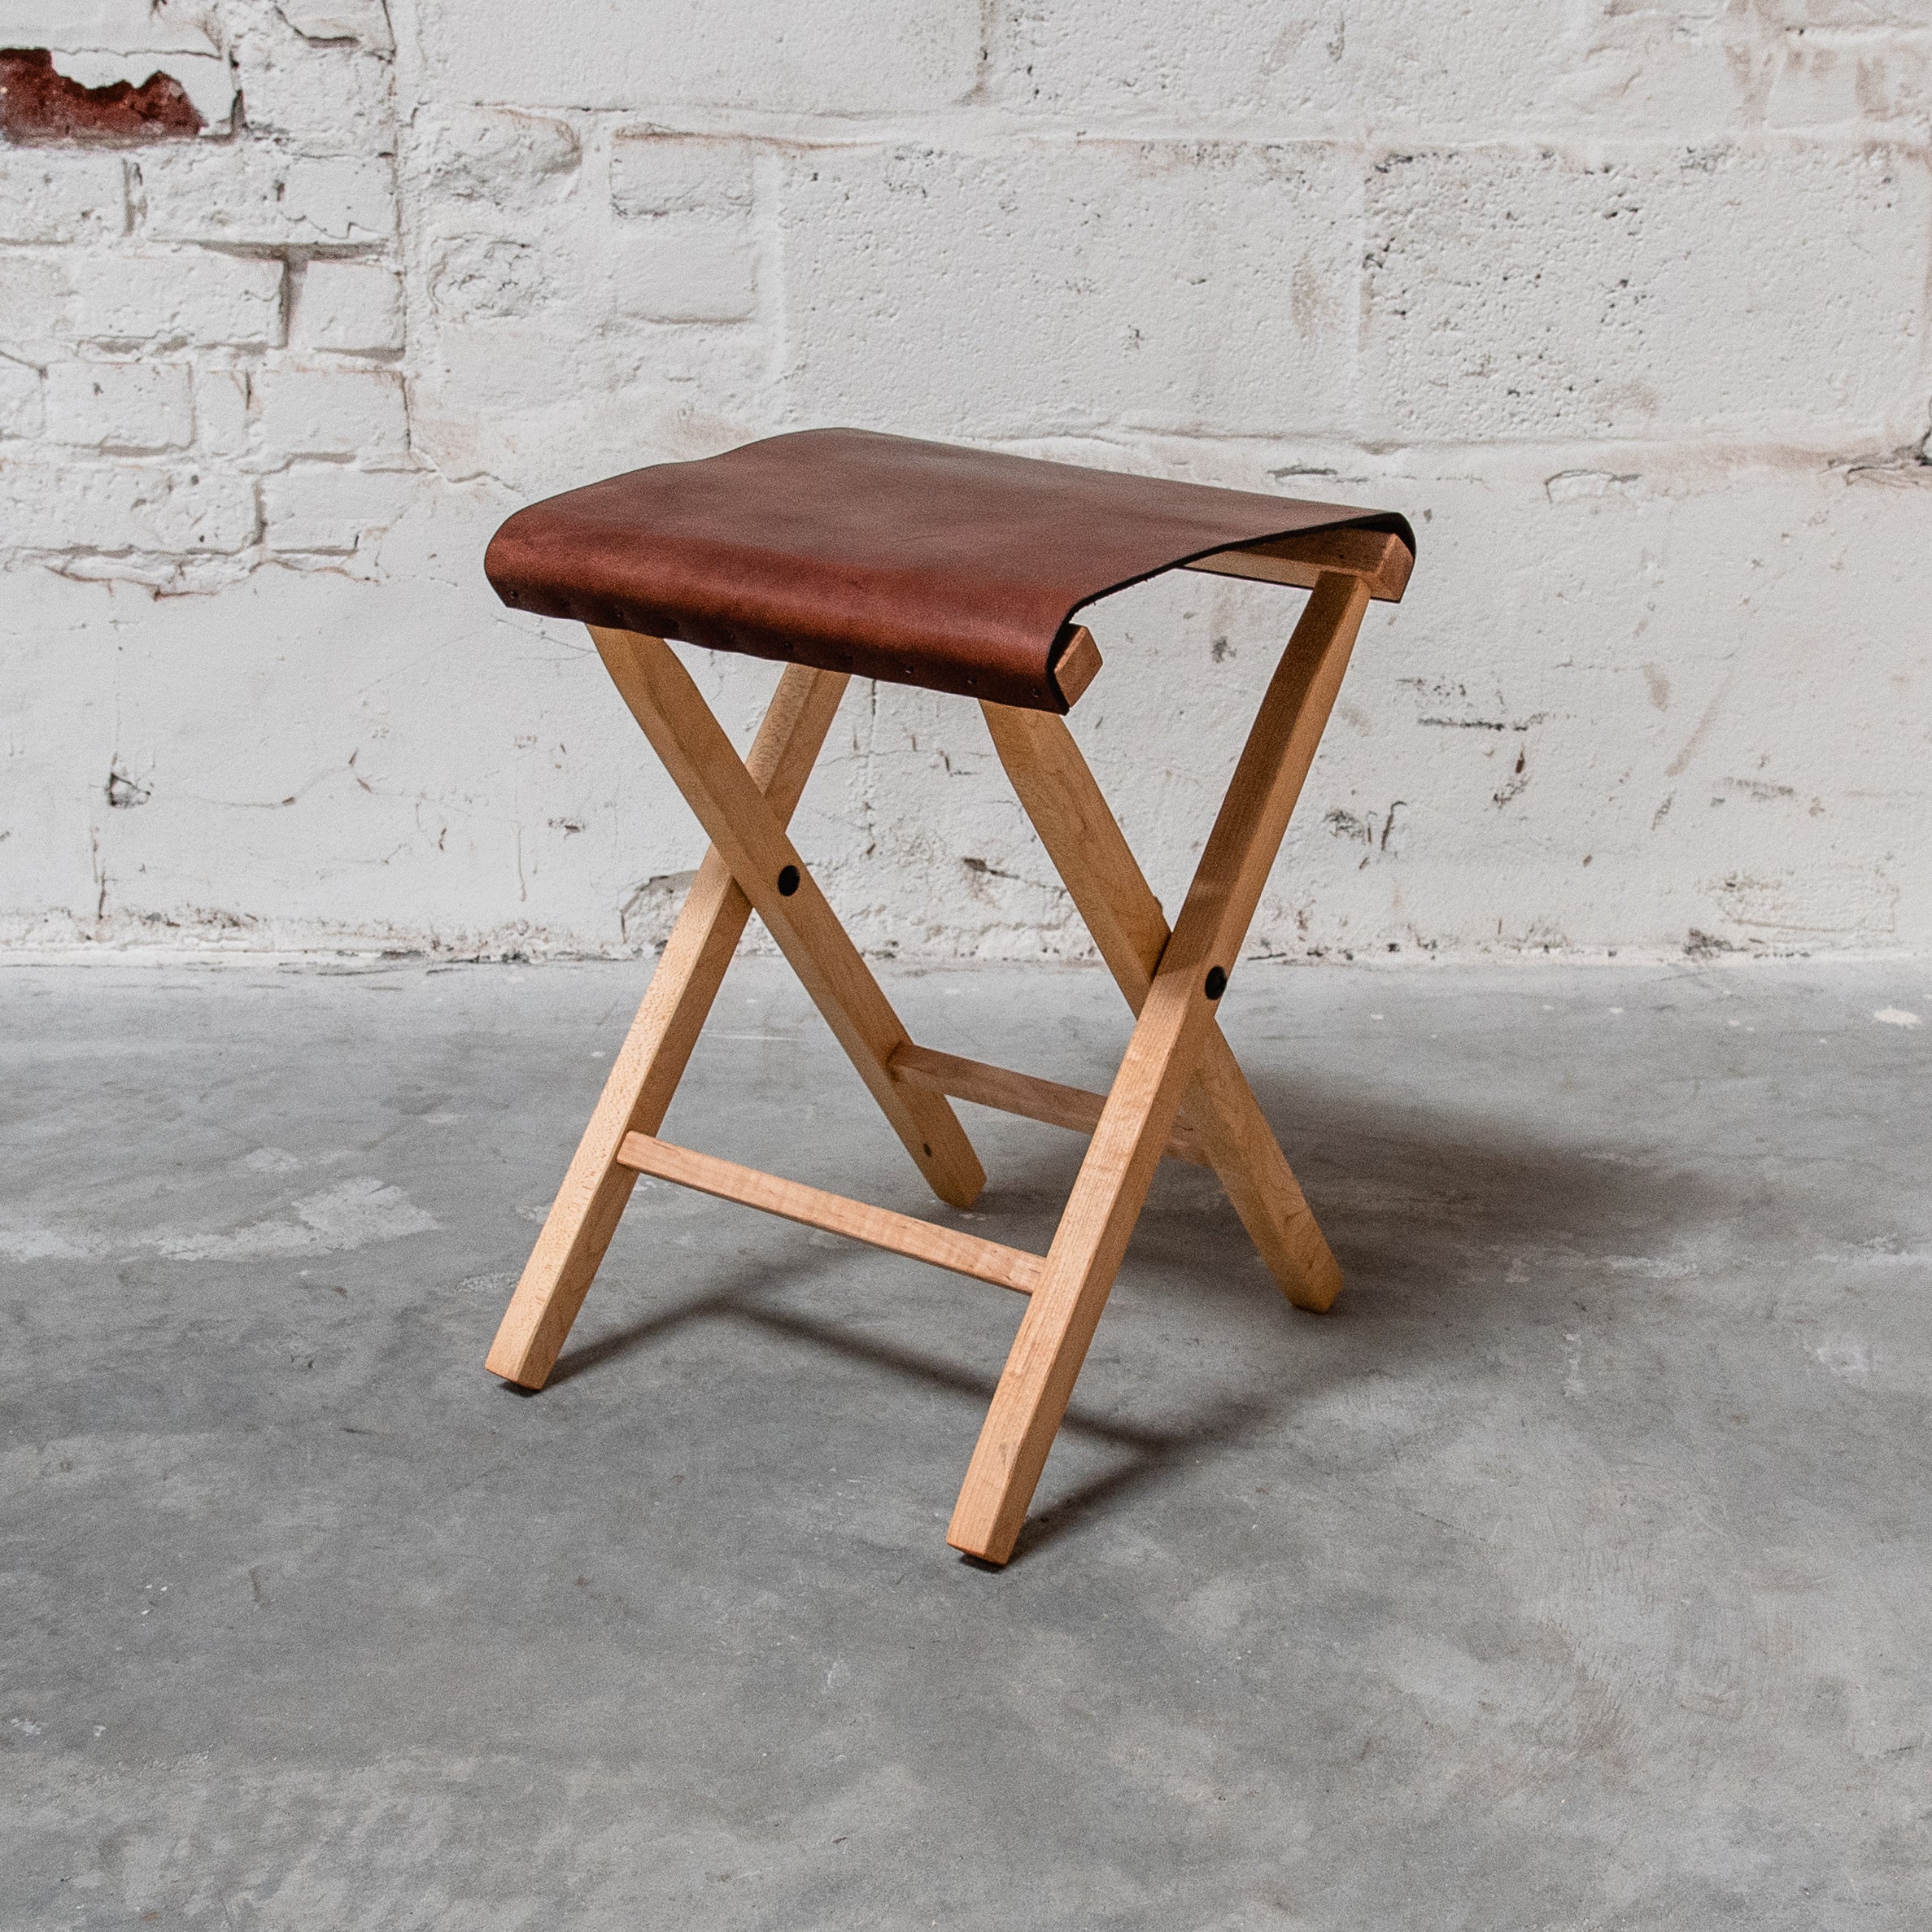 Lewis and Clark Expedition Stool